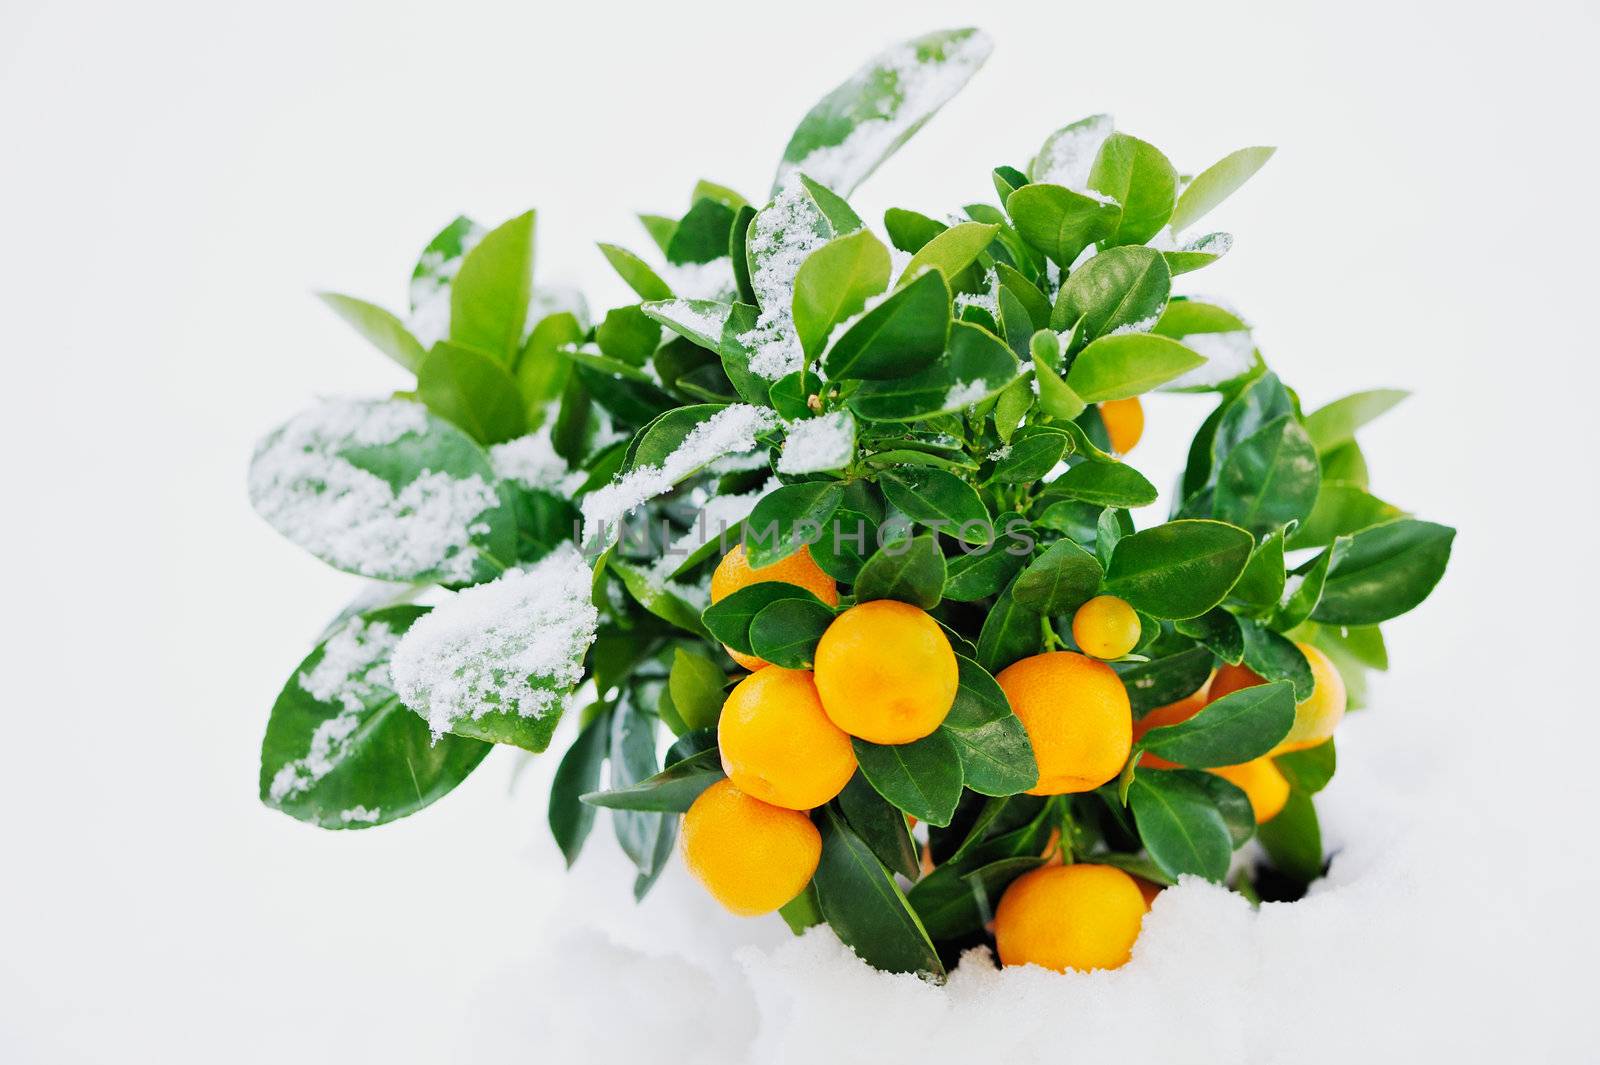 Spring snow on a green bush with oranges